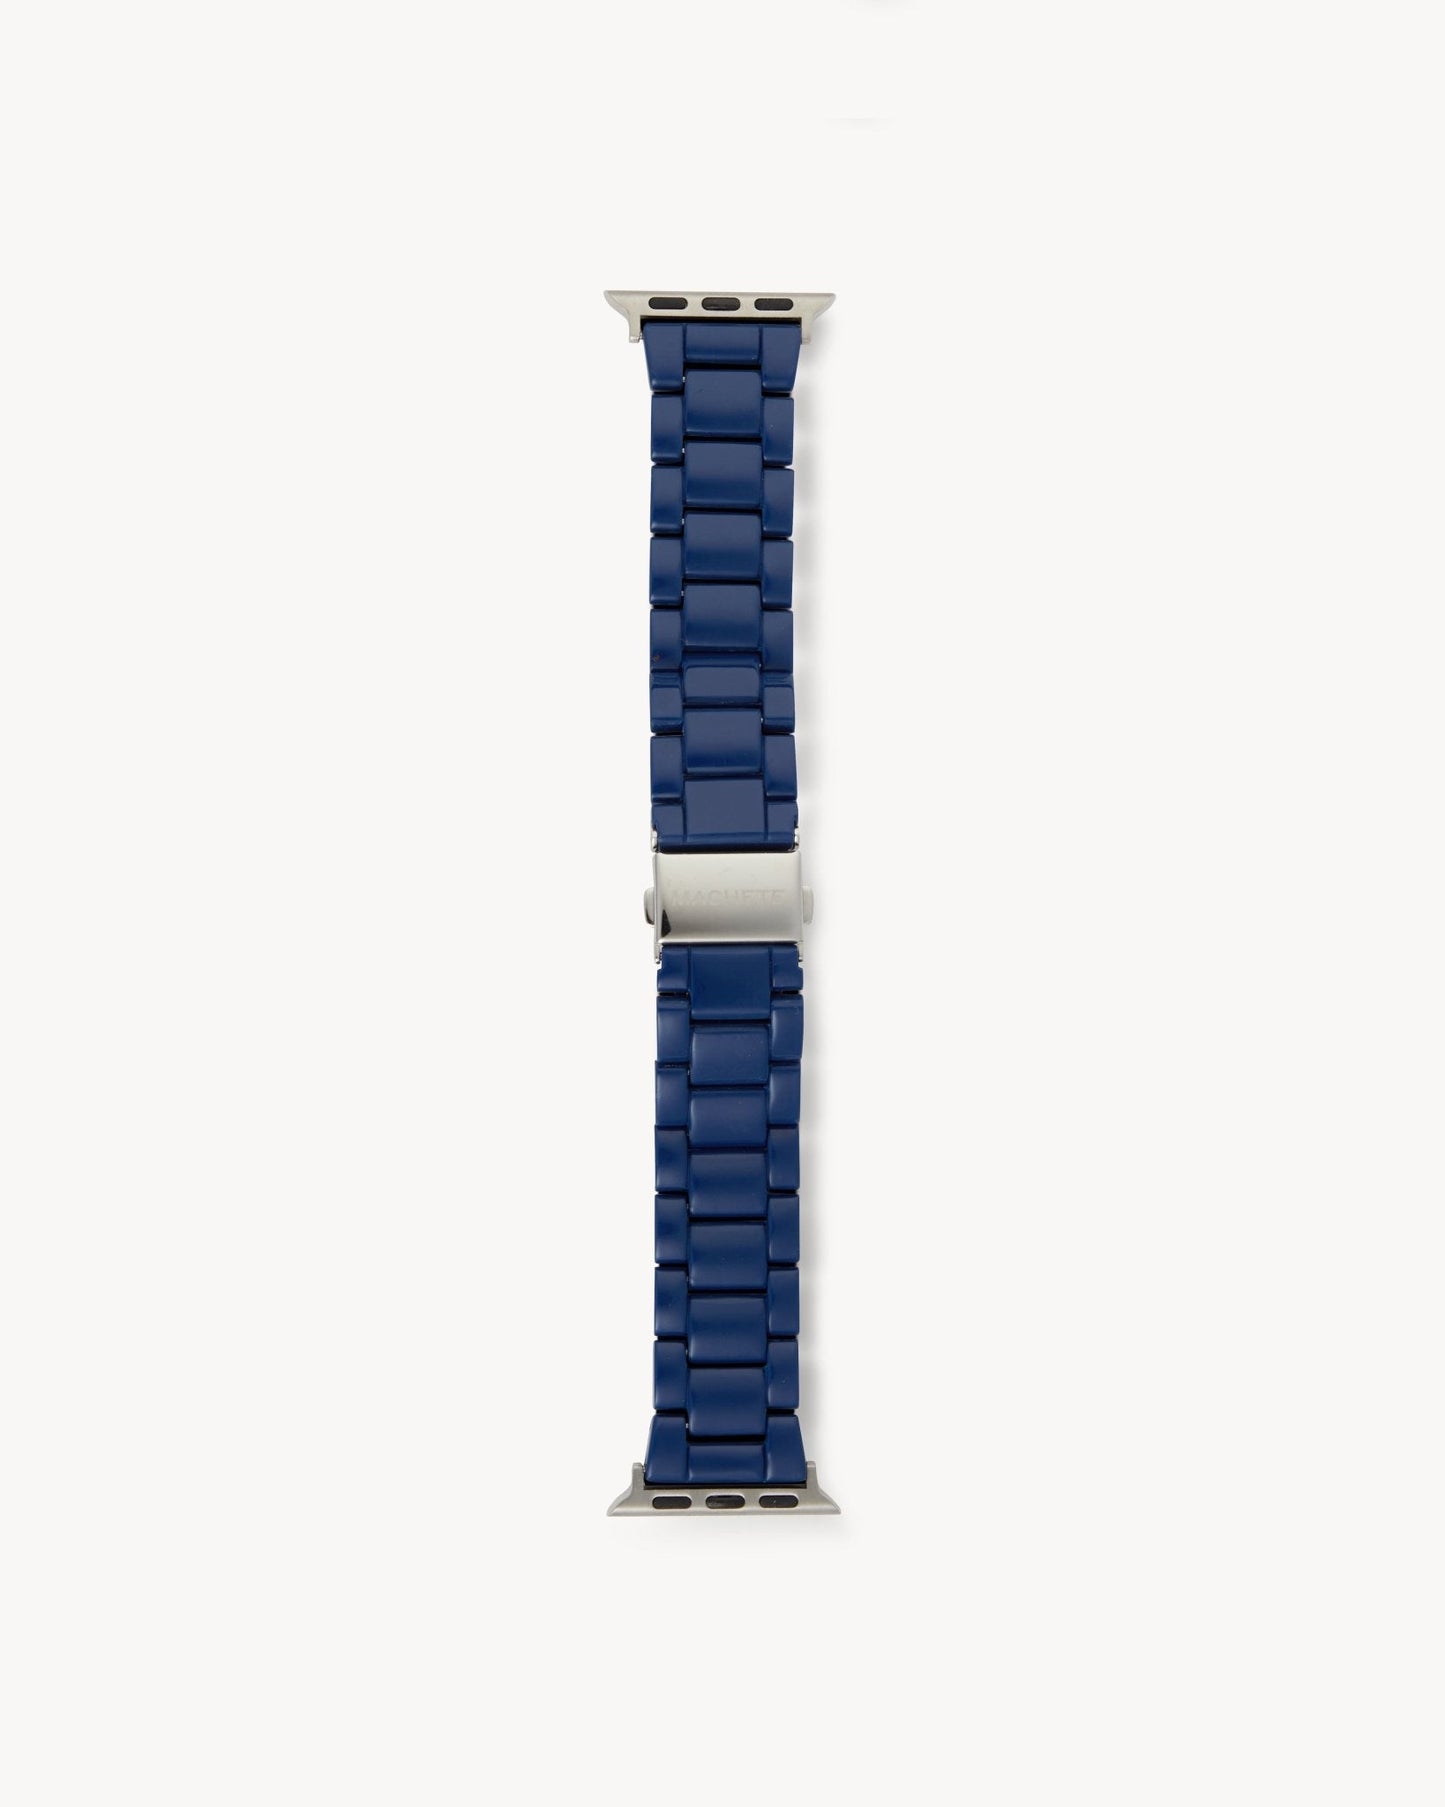 MACHETE Deluxe Apple Watch Band Set in French Navy Outlet